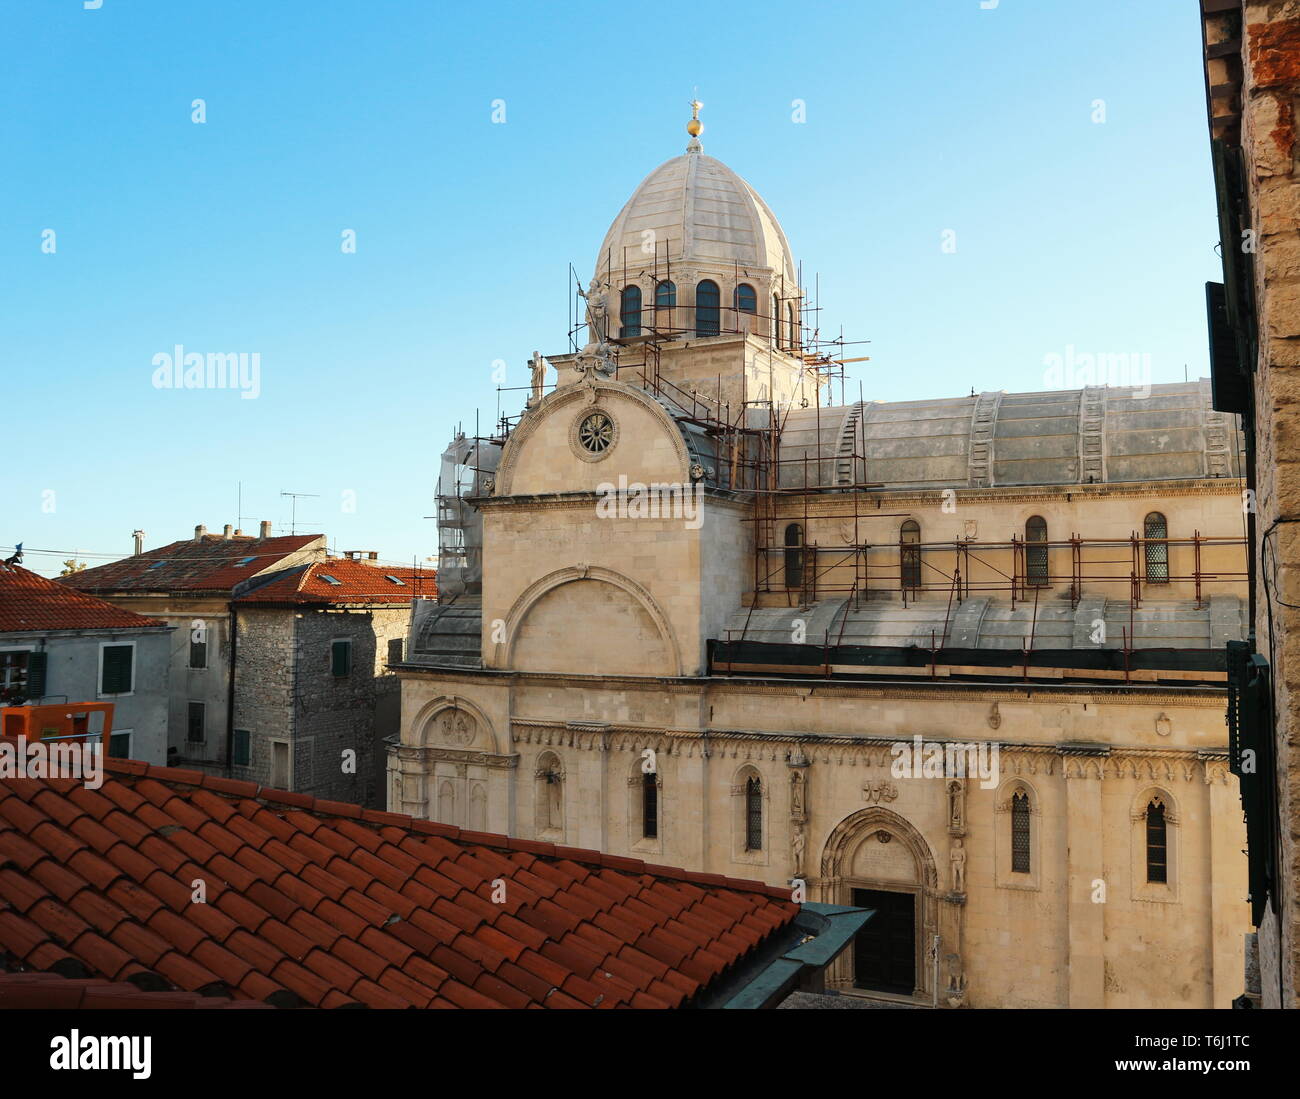 Cathedral of St. James in Croatia with construction site. Cathedral is in gothic and renaissance architecture. Stock Photo